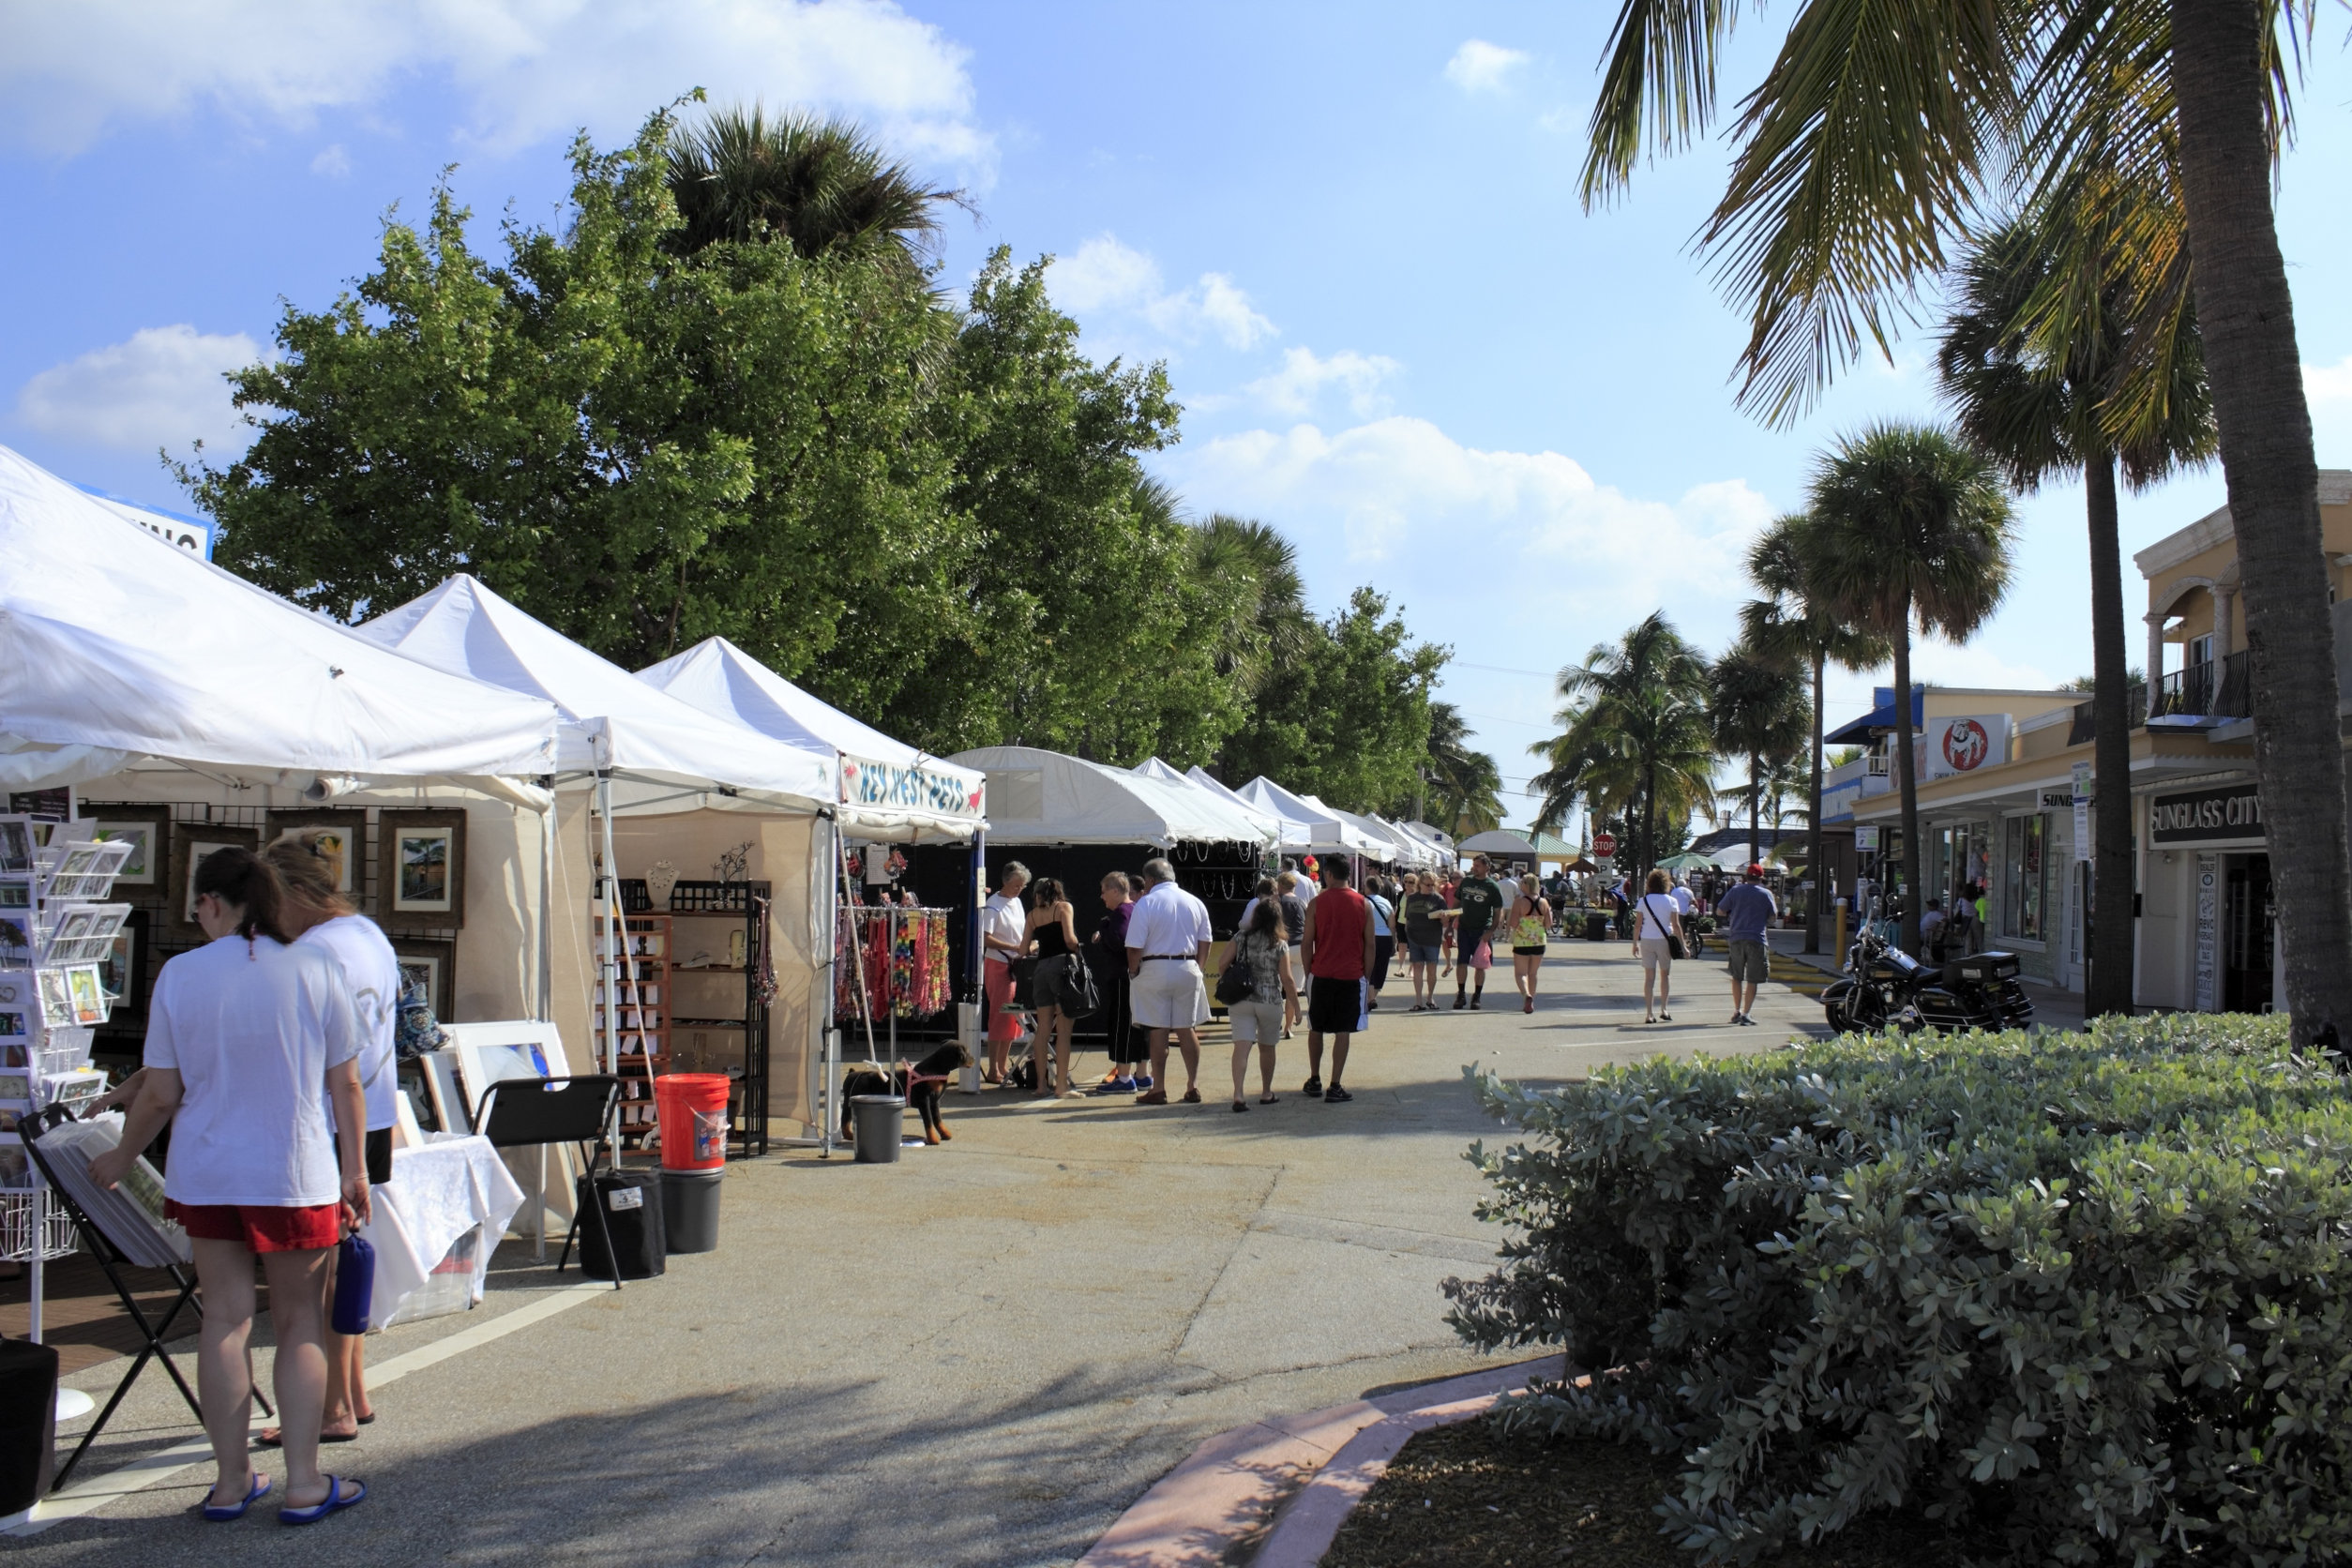 LAUDERDALE-BY-THE-SEA, FLORIDA - OCTOBER 28, 2012: People shopping early at the annual craft festival where local crafters display at outdoor galleries in Lauderdale-by-the-Sea, Florida.